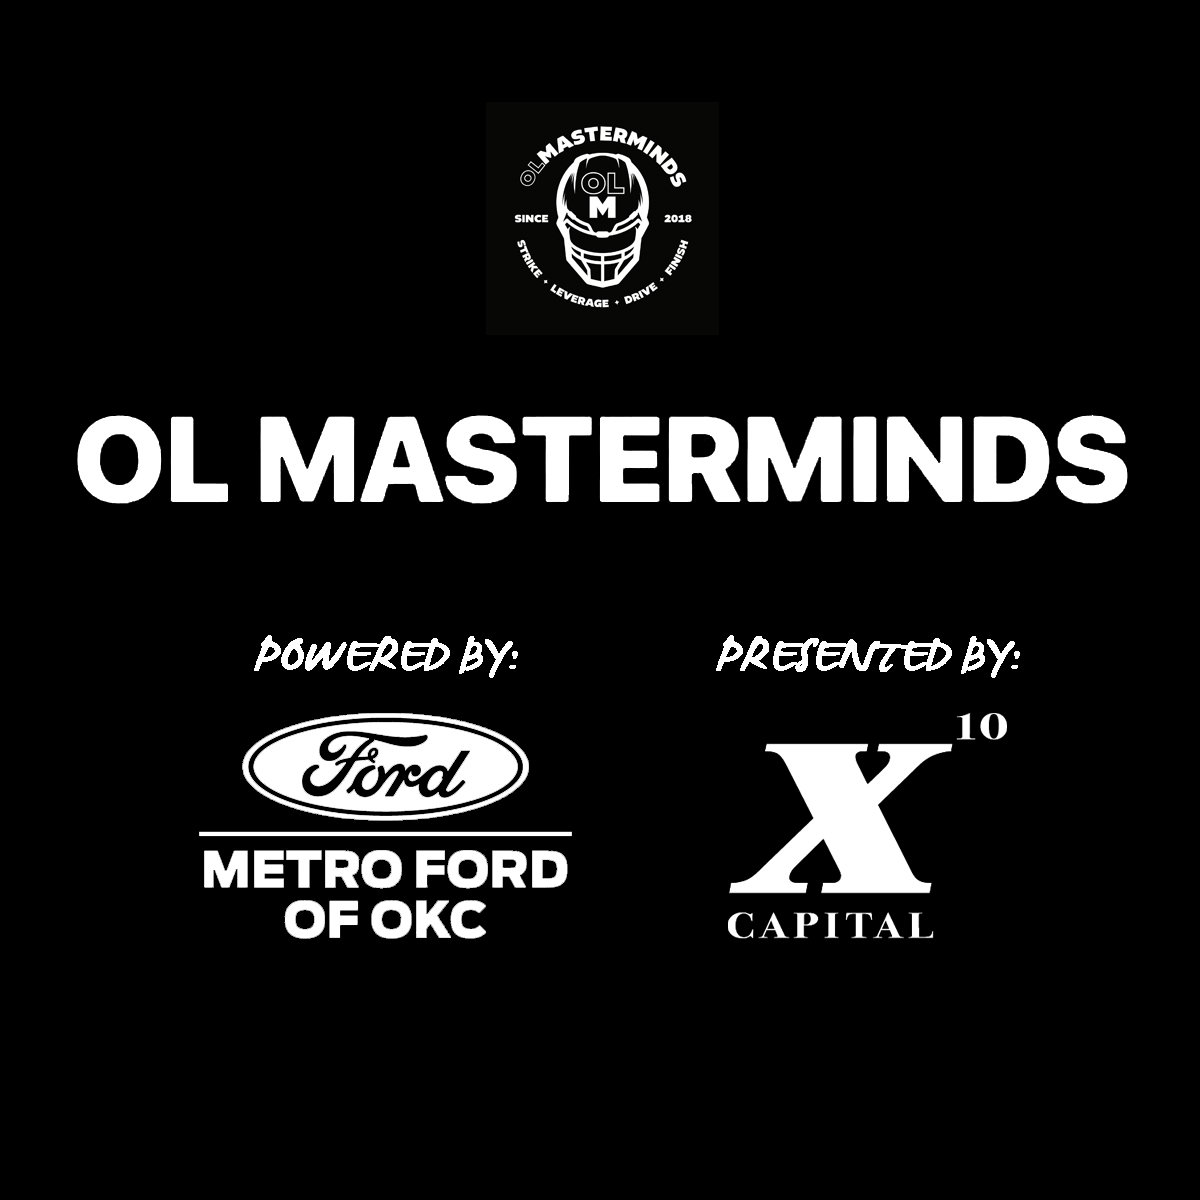 There is only 1️⃣ OL summit! See y'all at @OLMasterminds soon. 😤